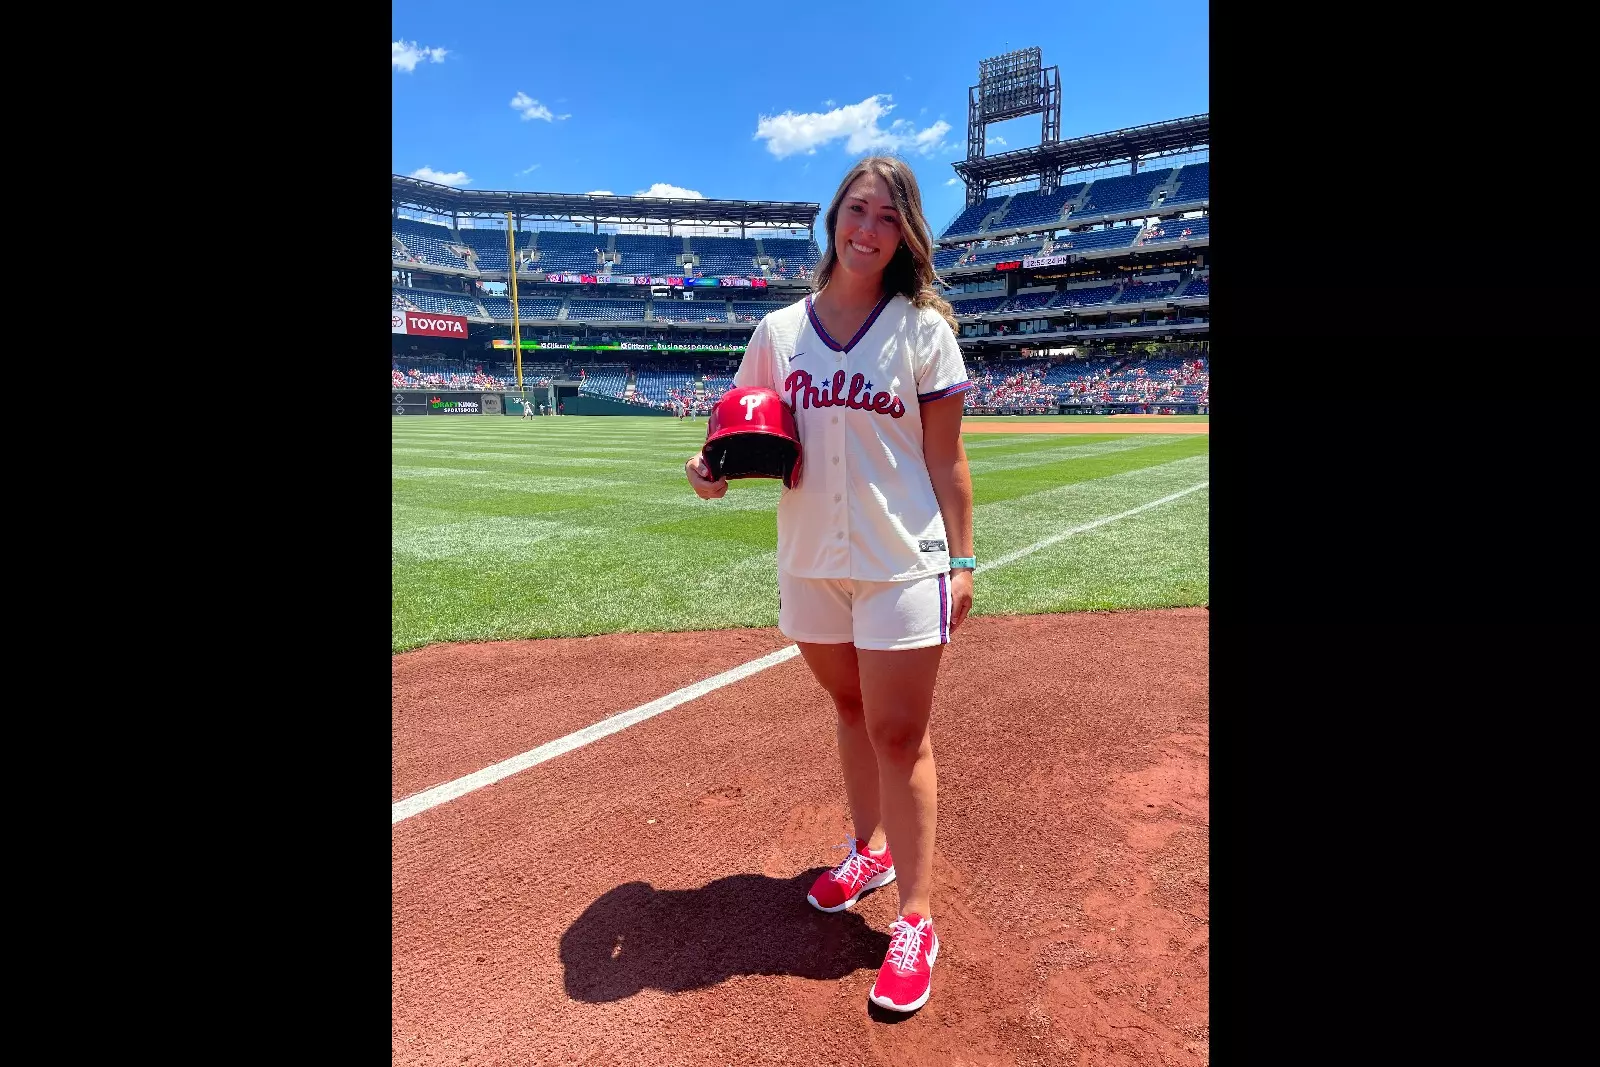 Phillies girl leaves baseball viewers distracted with steamy show